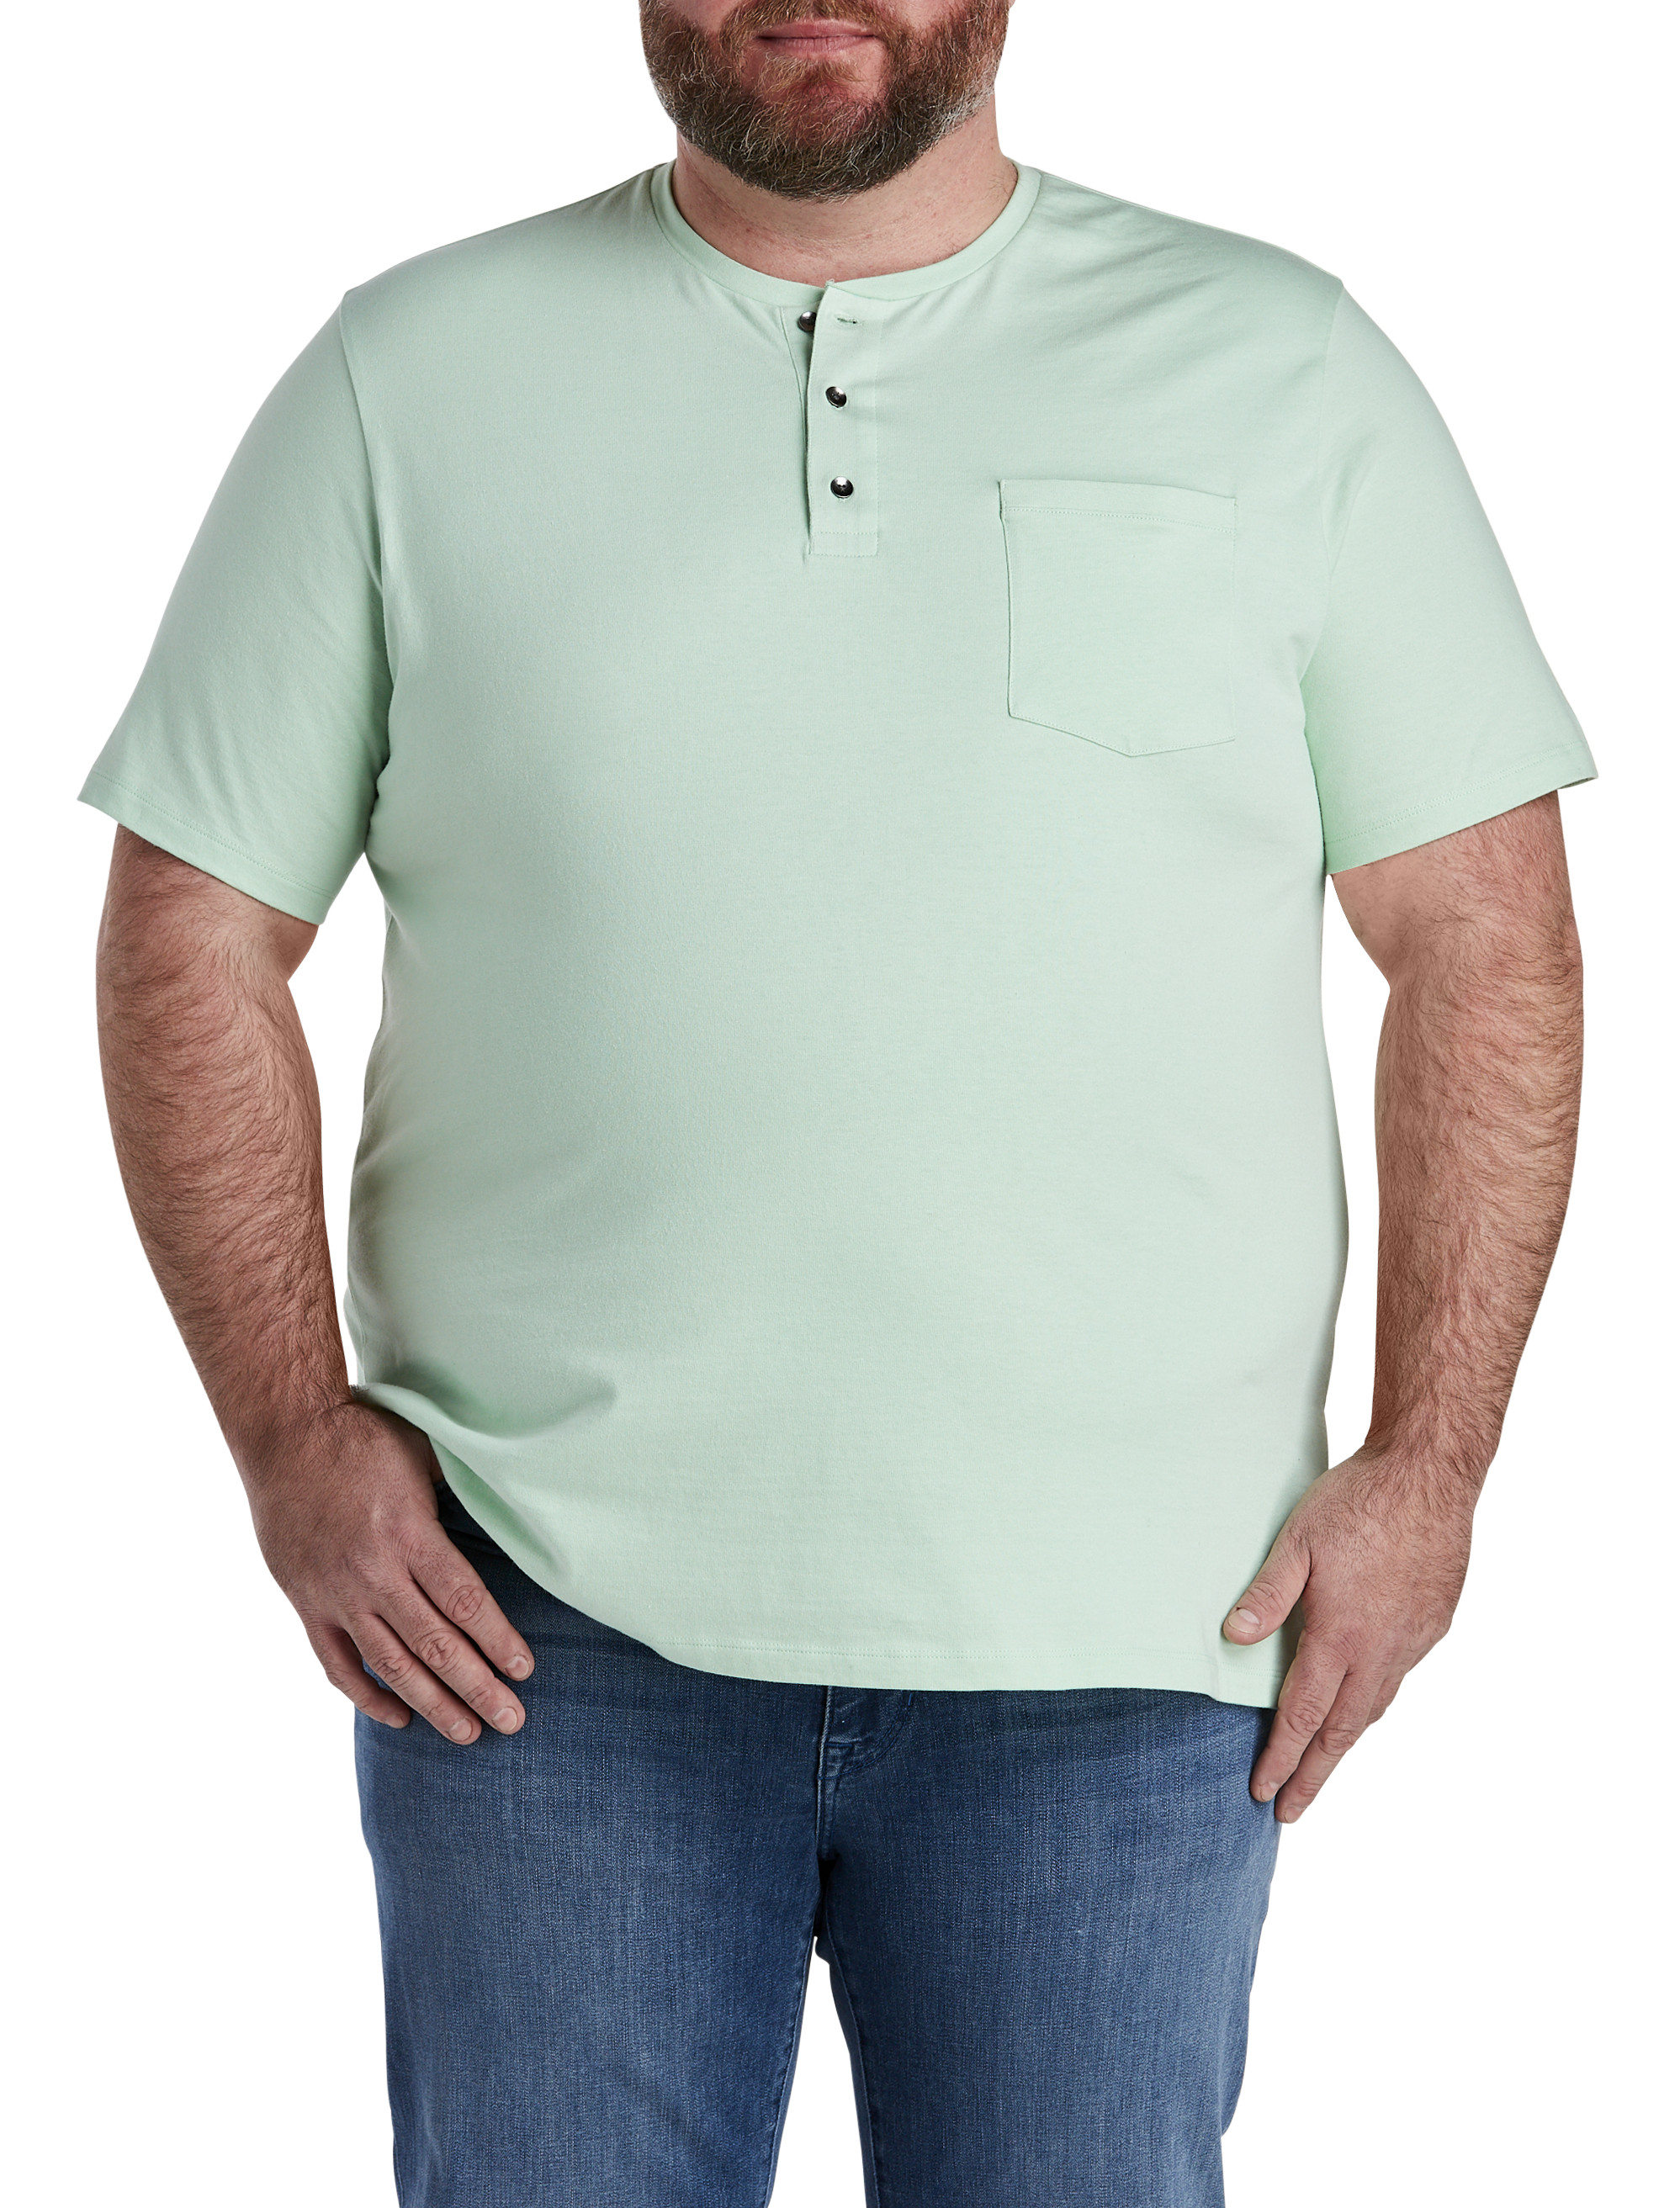 Men's Henley T-Shirts, Big and Tall